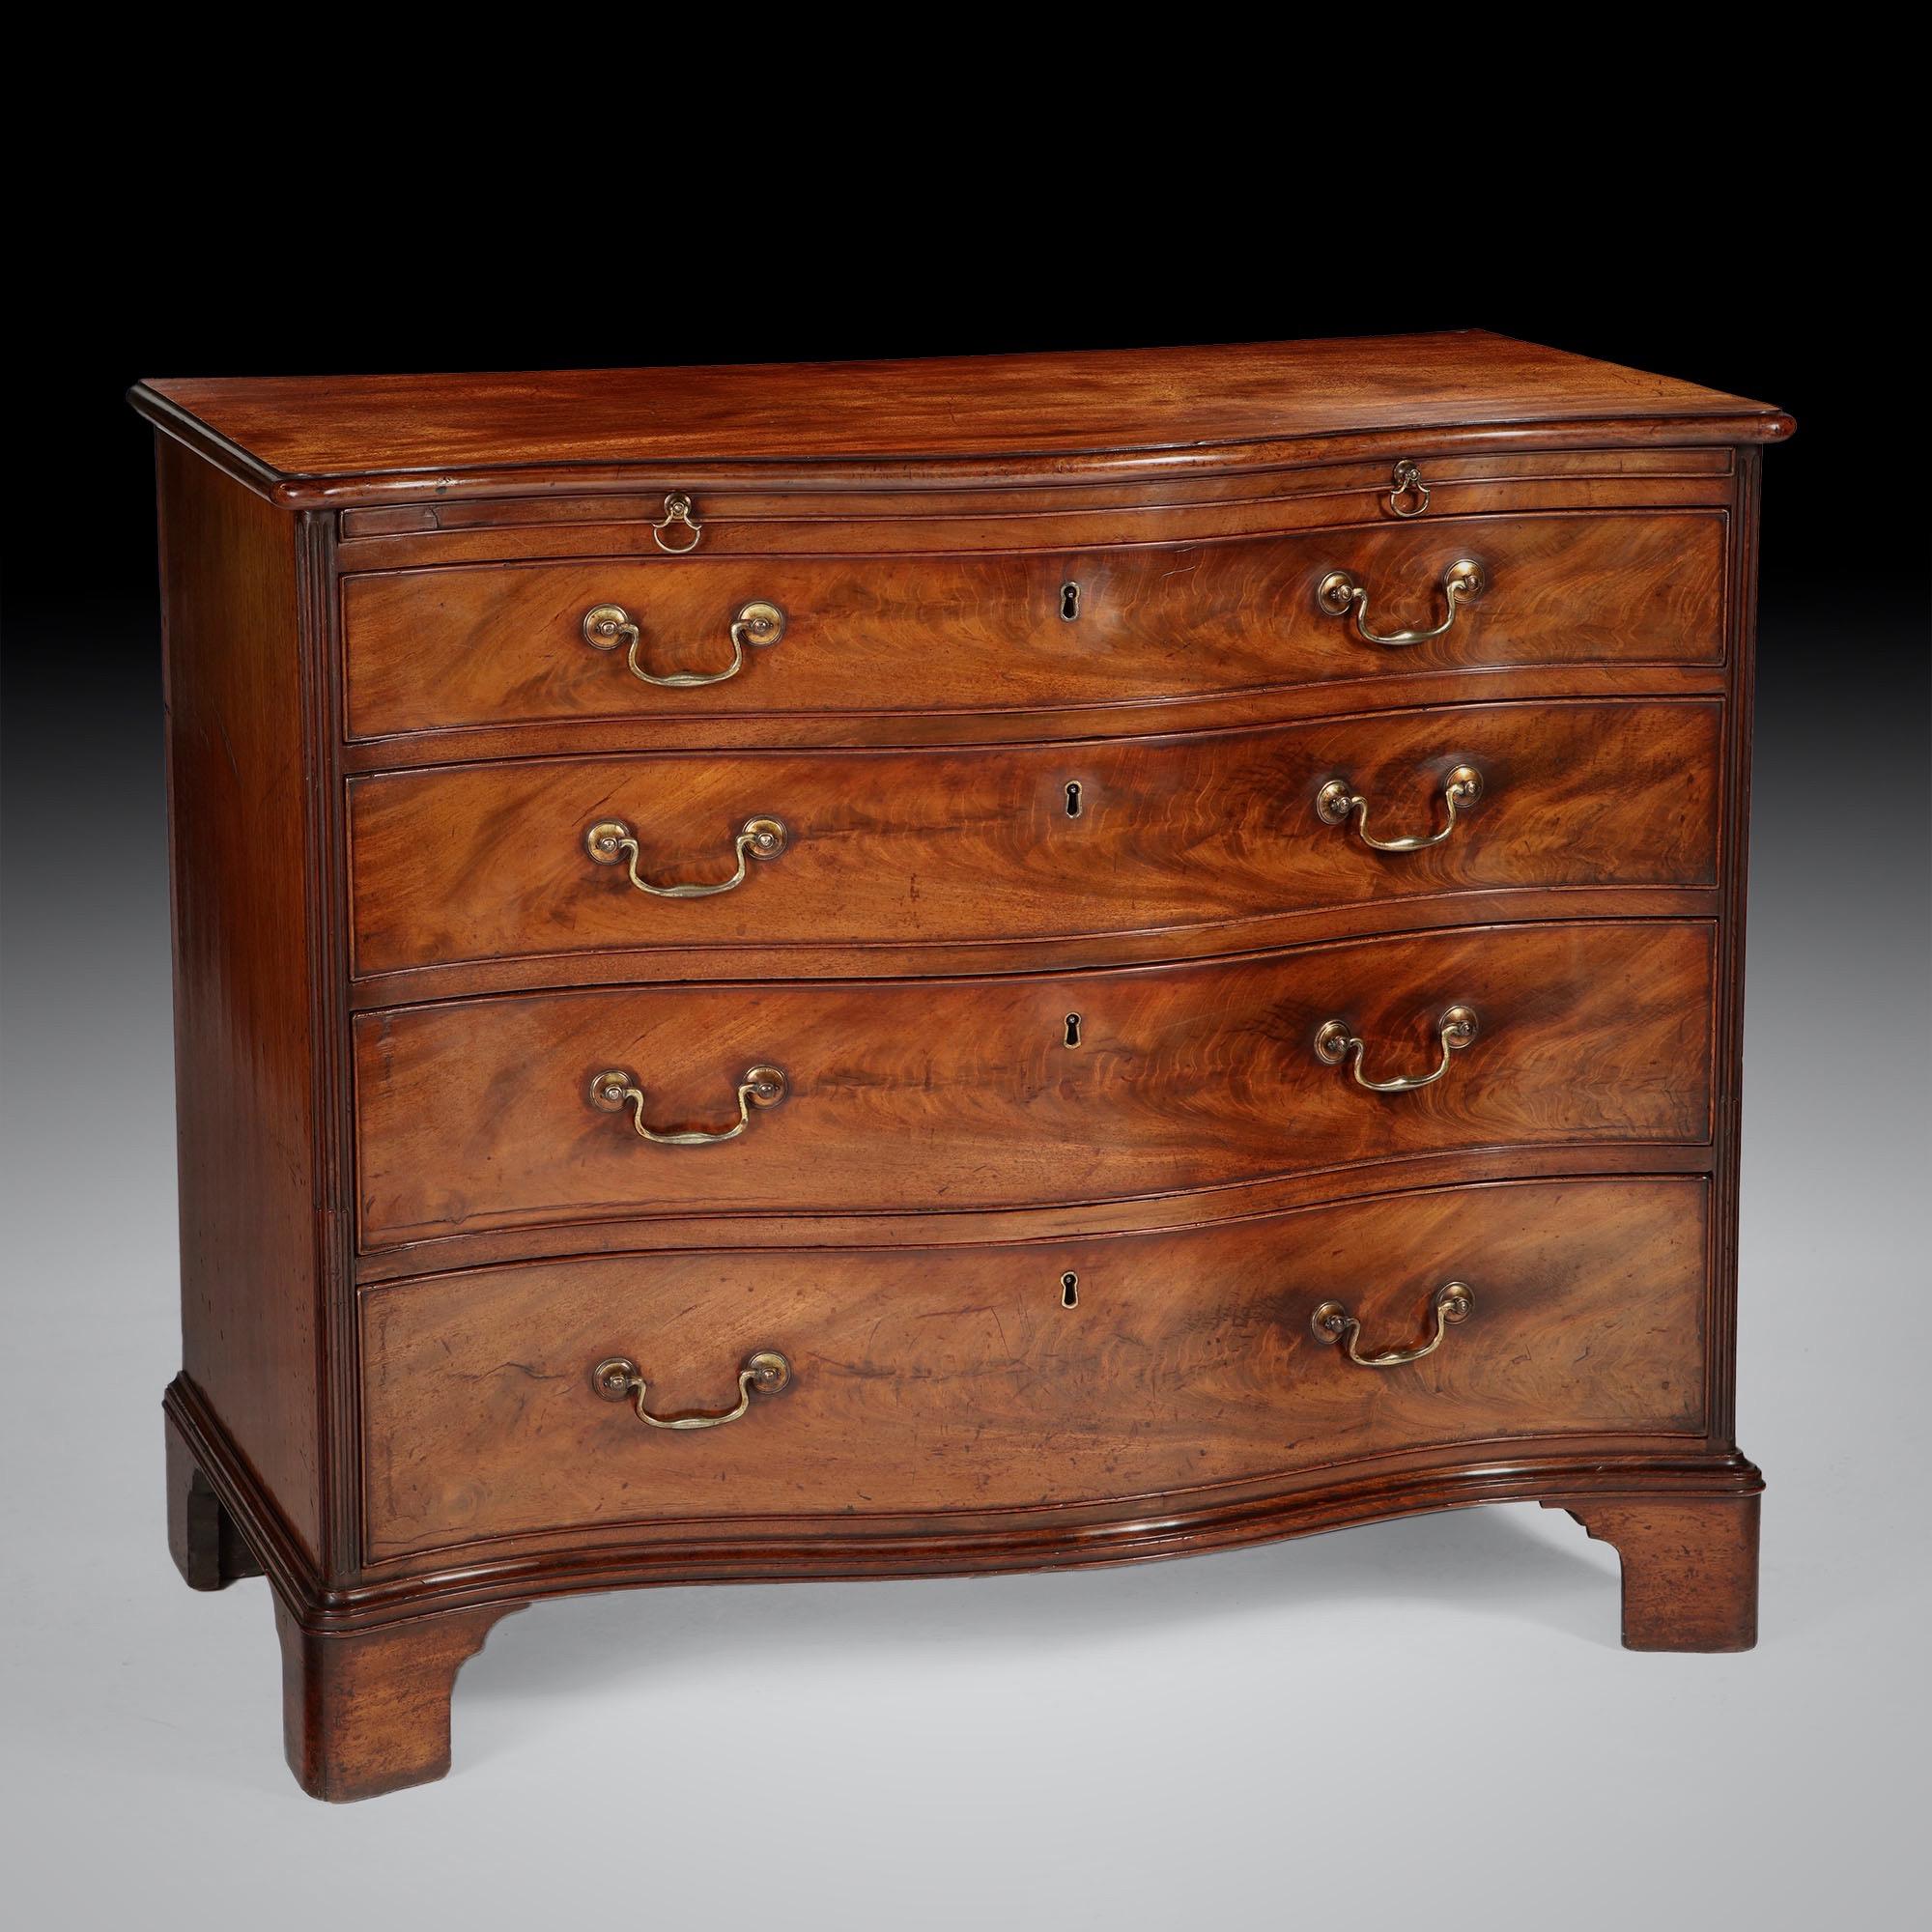 Georgian perfection, 18th century George III mahogany serpentine chest of drawers with brushing slide, fabulous reeded columns and retaining superb original age patinated surface. Choice cuts of flame mahogany veneer sit below the brushing-slide to